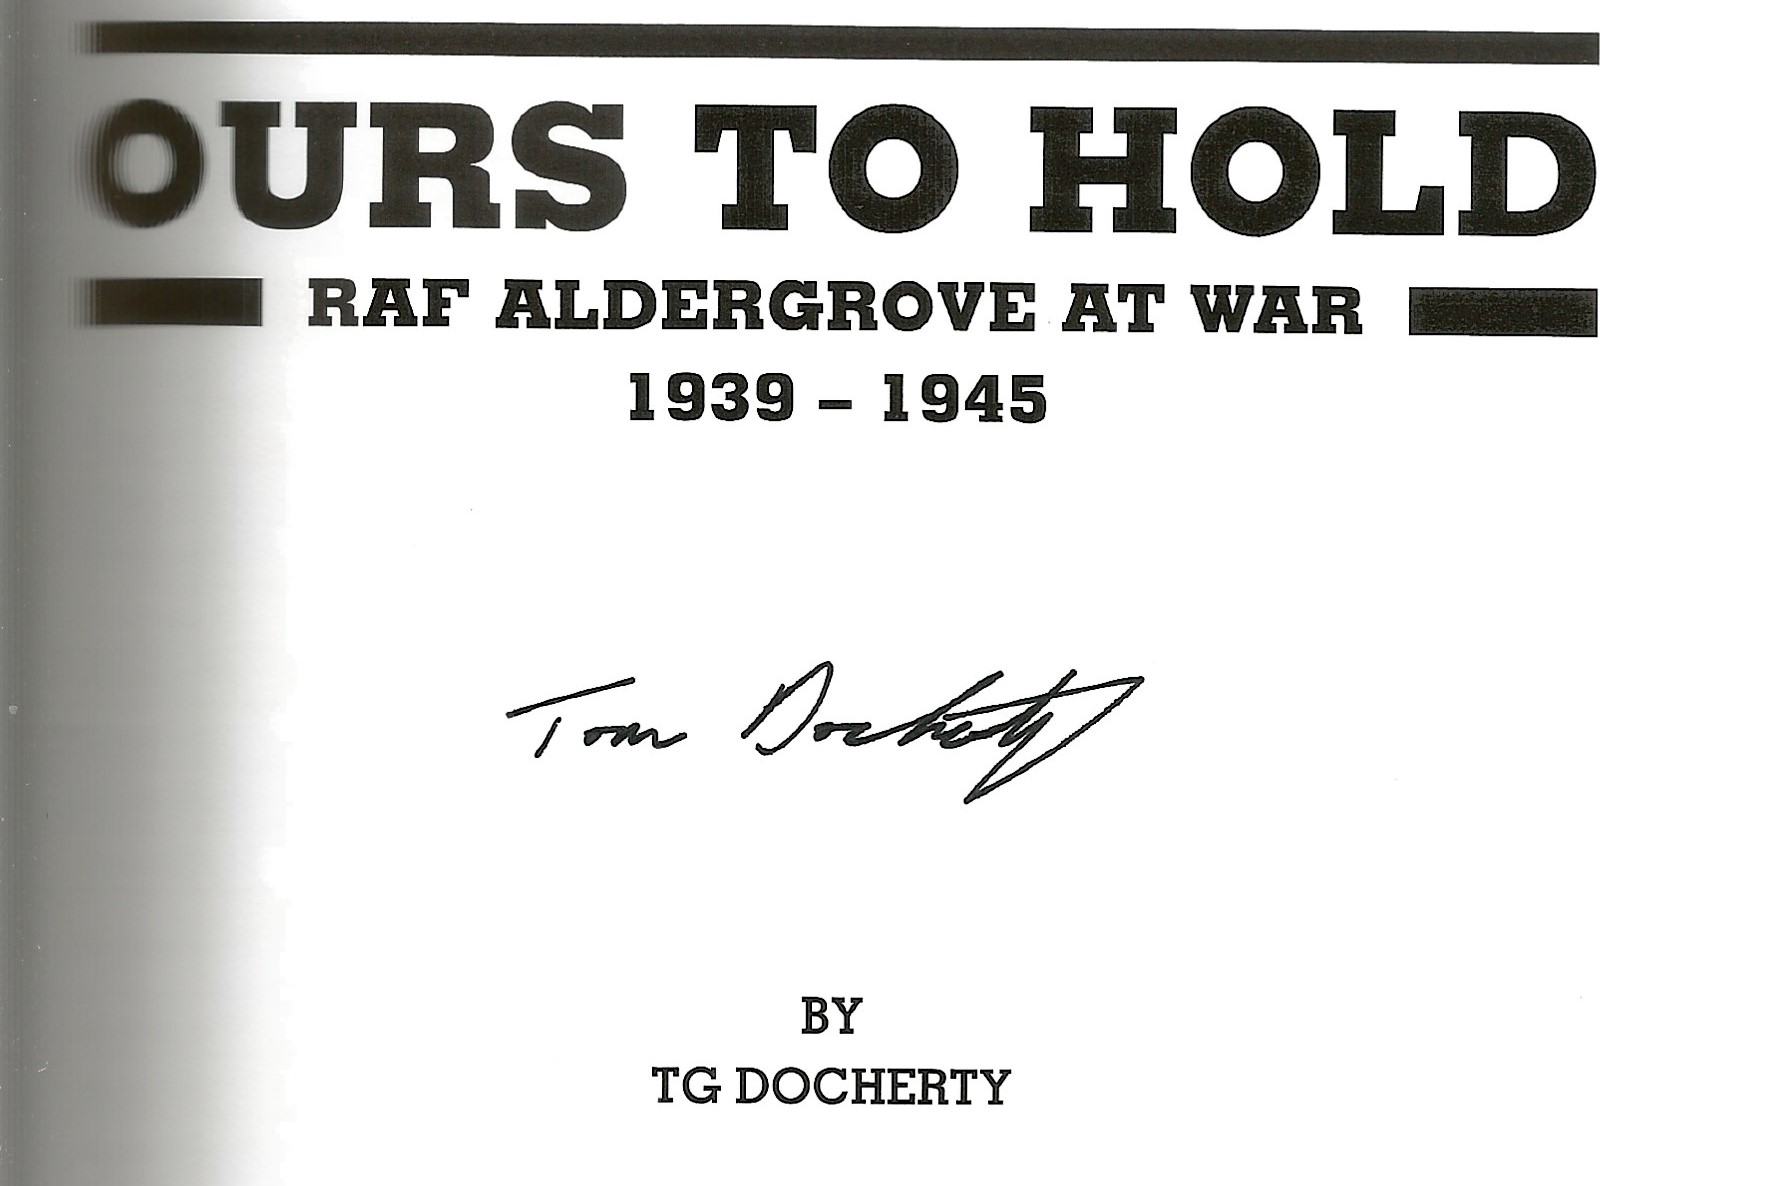 T G Docherty. Ours To Hold, RAF Aldergrove At War. First Edition WW2 hardback book in superb - Image 2 of 3